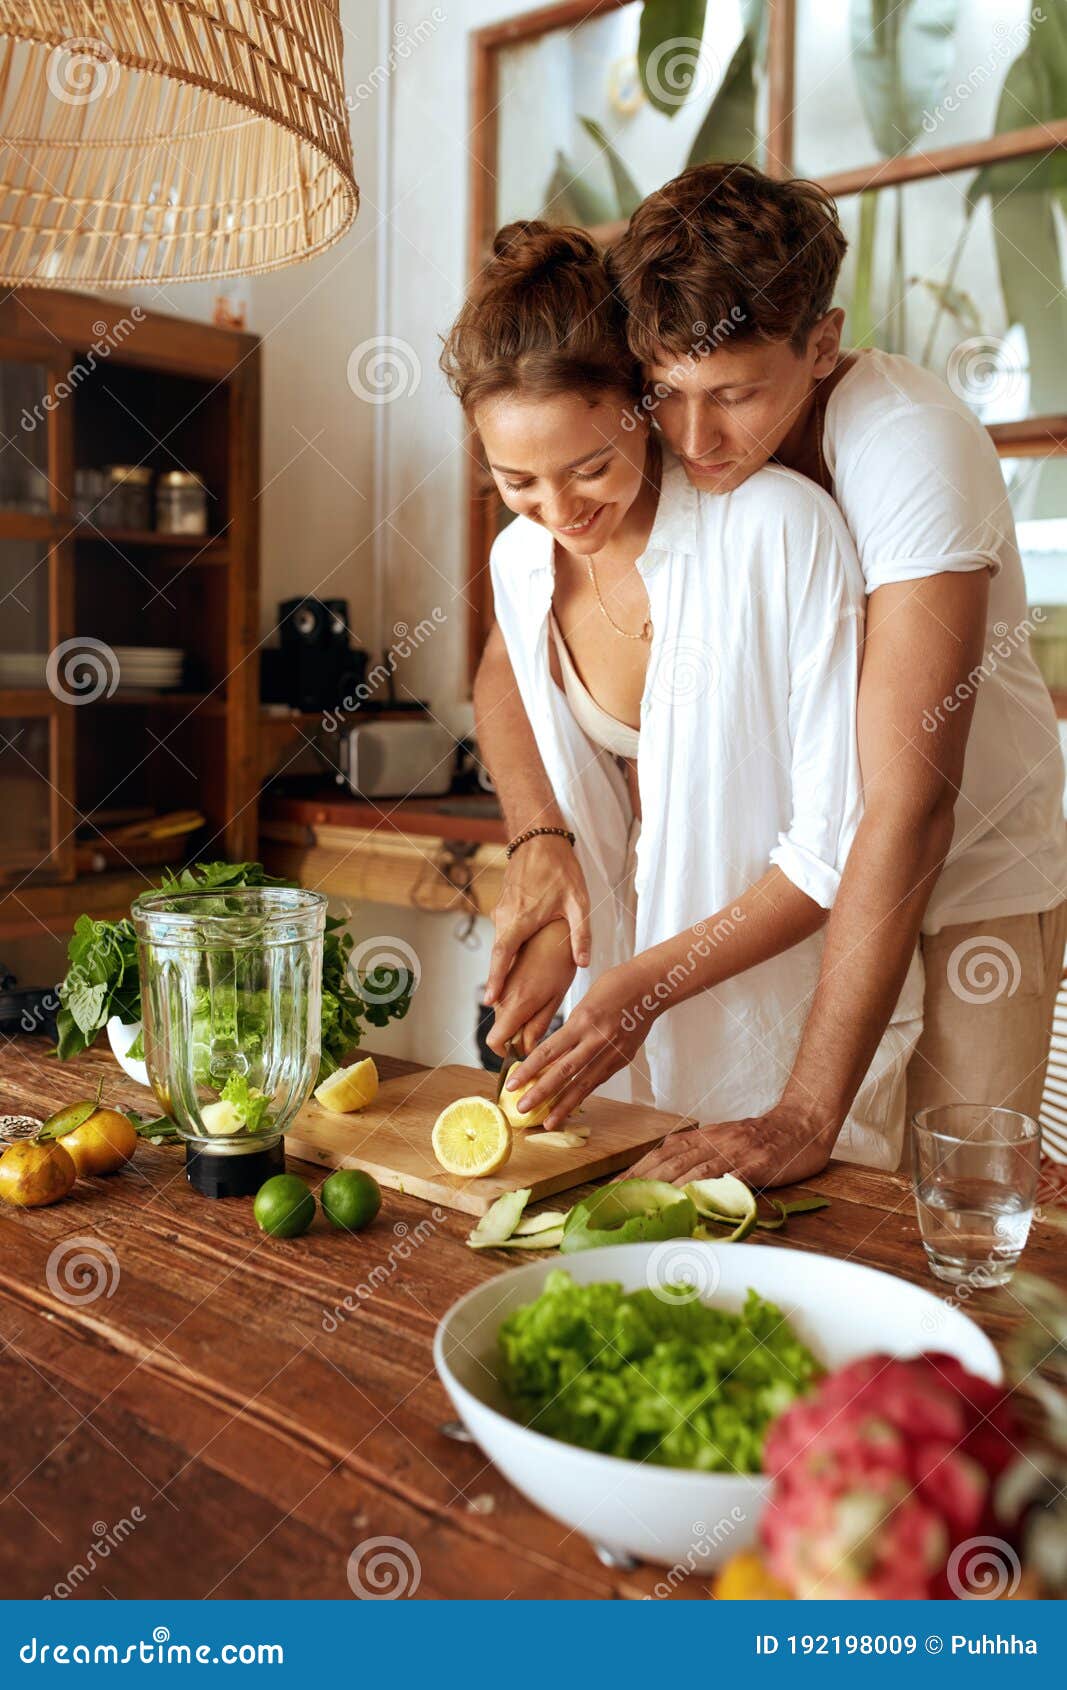 Man and Woman Cooking Together at Kitchen. Romantic Couple Cutting ...